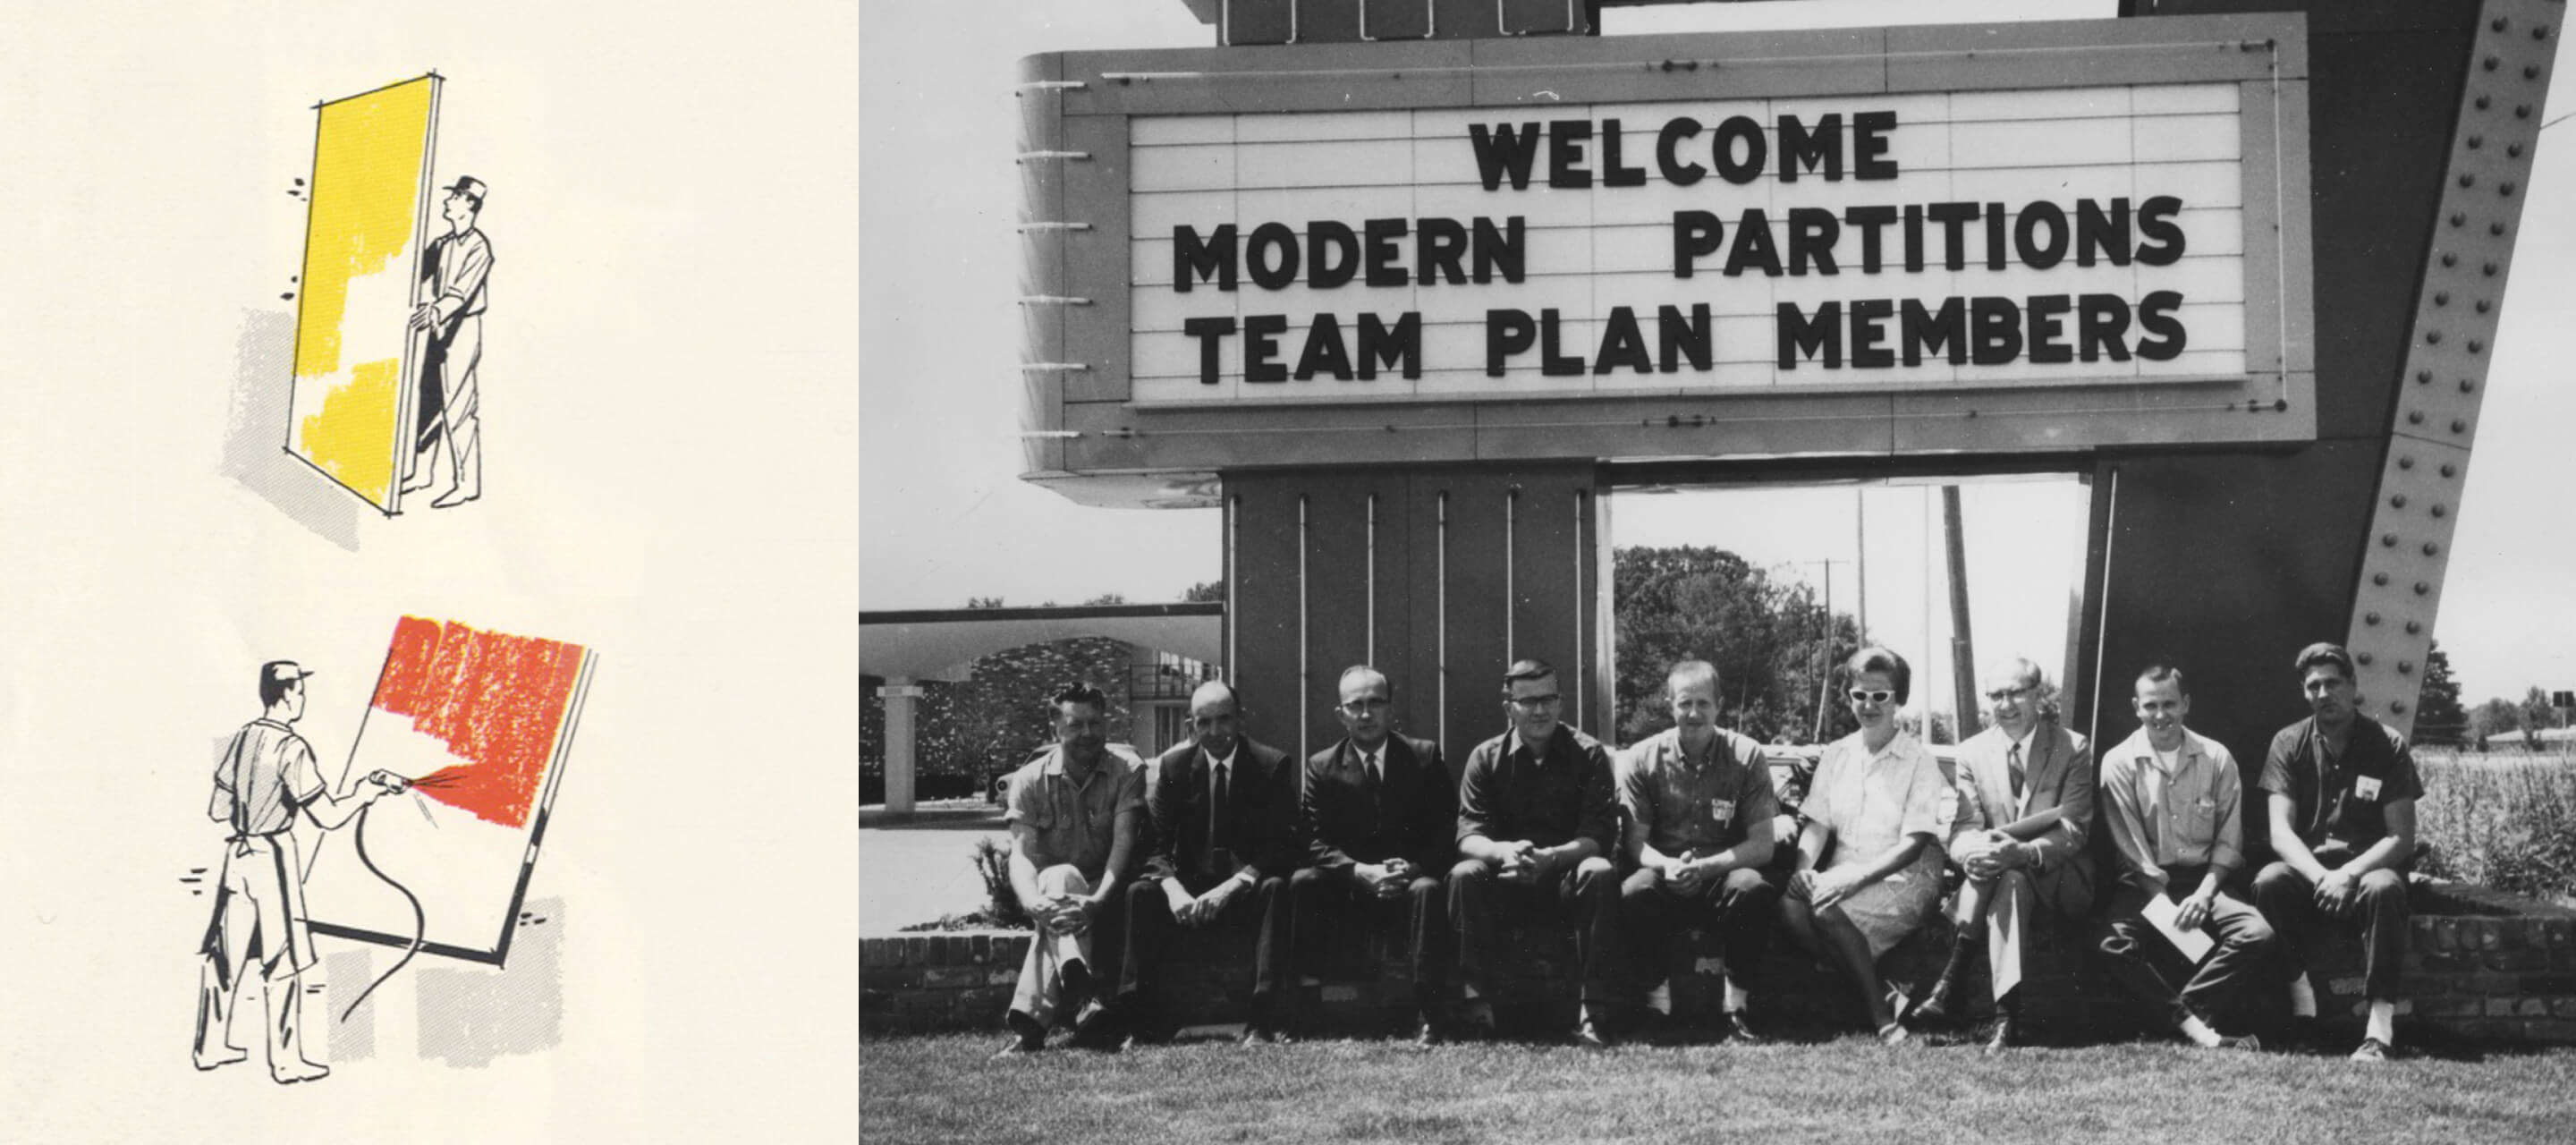 1950s​—In 1951, when a freelance salesman pitches a sketch of proposed bank-type partitions for the United Auto Workers headquarters in Detroit, G.W.’s ﬁrst foray into ﬂoor-to-ceiling movable walls is realized. ​By the end of the decade, Modern Partitions, Inc., is formed.​